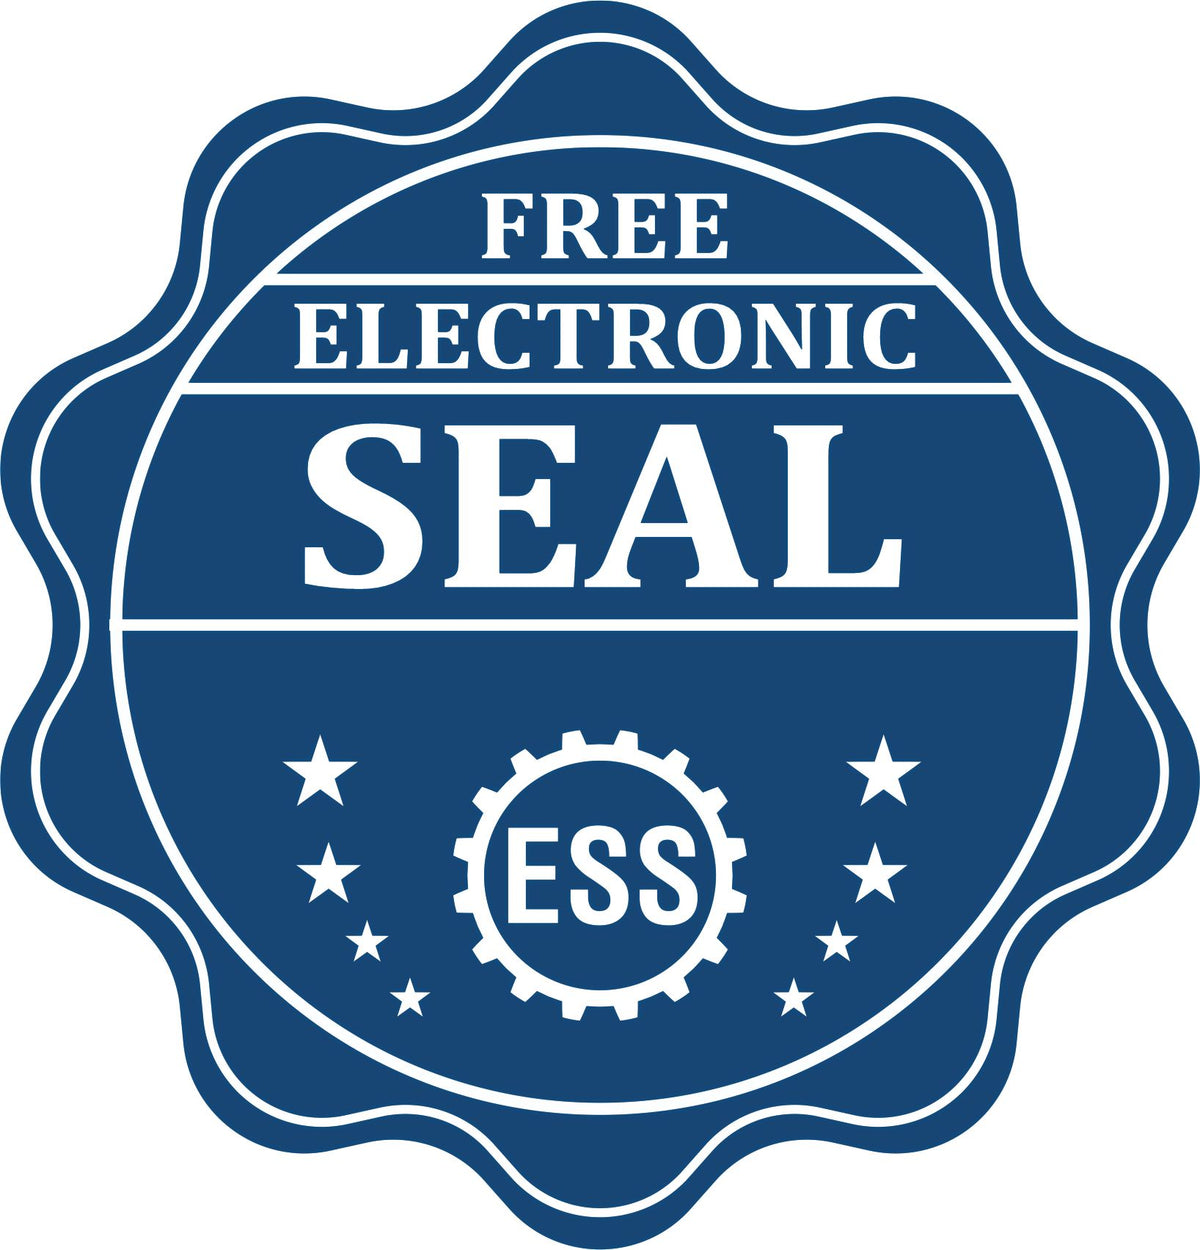 A badge showing a free electronic seal for the Wooden Handle Wyoming Rectangular Notary Public Stamp with stars and the ESS gear on the emblem.